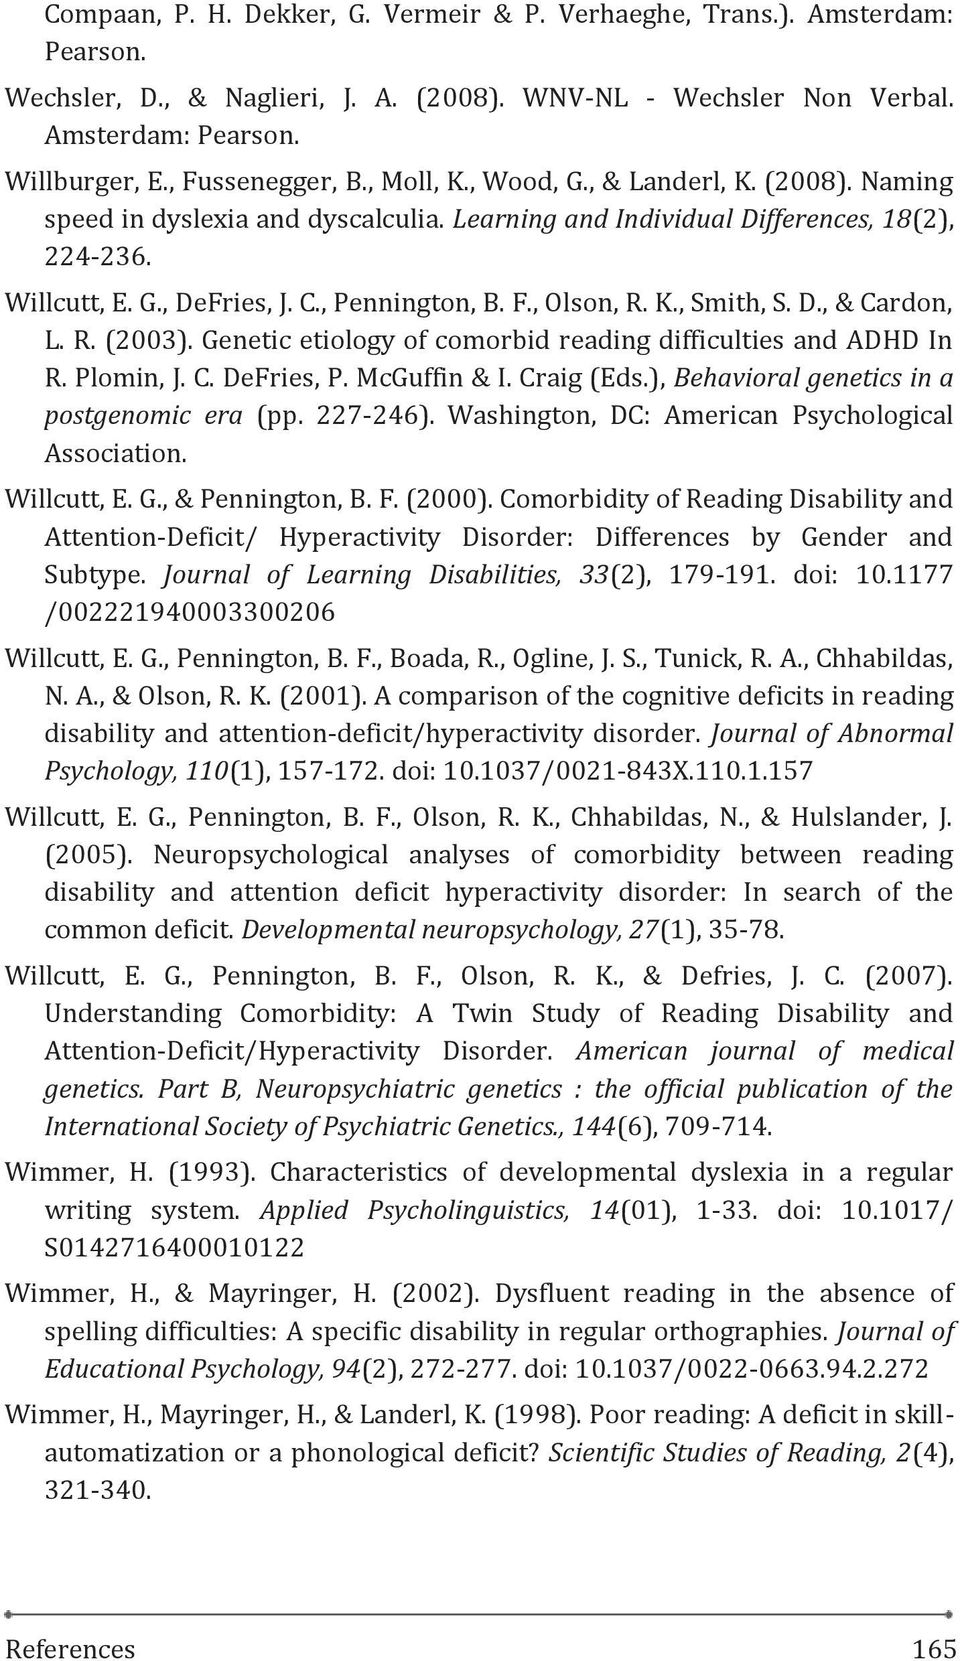 K., Smith, S. D., & Cardon, L. R. (2003). Genetic etiology of comorbid reading difficulties and ADHD In R. Plomin, J. C. DeFries, P. McGuffin & I. Craig (Eds.